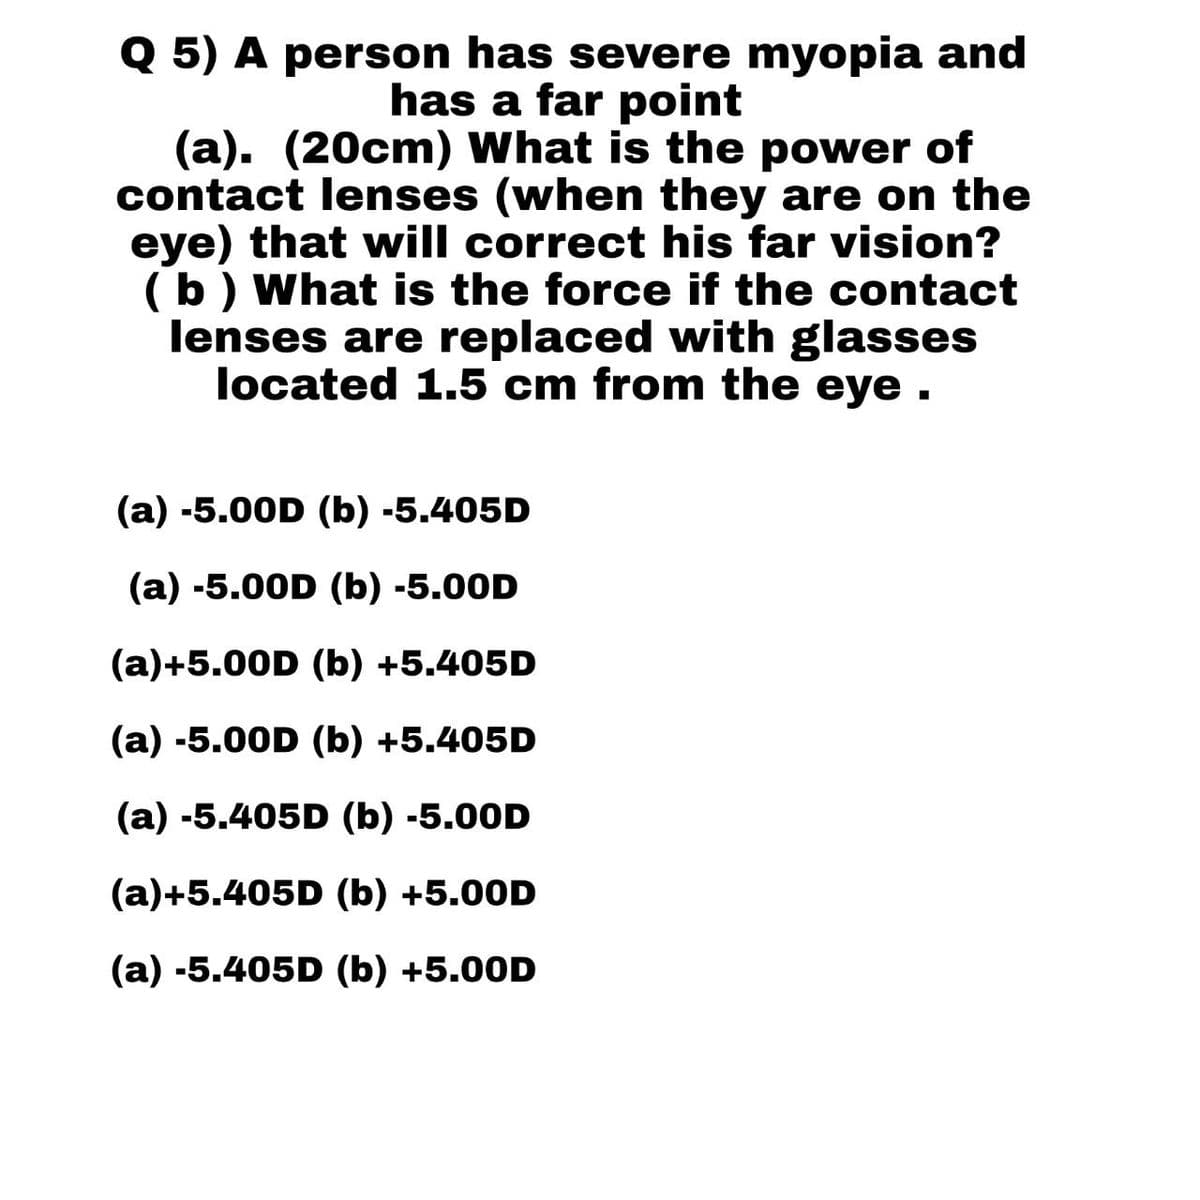 Q 5) A person has severe myopia and
has a far point
(a). (20cm) What is the power of
contact lenses (when they are on the
eye) that will correct his far vision?
(b) What is the force if the contact
lenses are replaced with glasses
located 1.5 cm from the eye.
(a) -5.00D (b) -5.405D
(a) -5.00D (b) -5.00D
(a)+5.00D (b) +5.405D
(a) -5.00D (b) +5.405D
(a) -5.405D (b) -5.00D
(a)+5.405D (b) +5.00D
(a) -5.405D (b) +5.00D